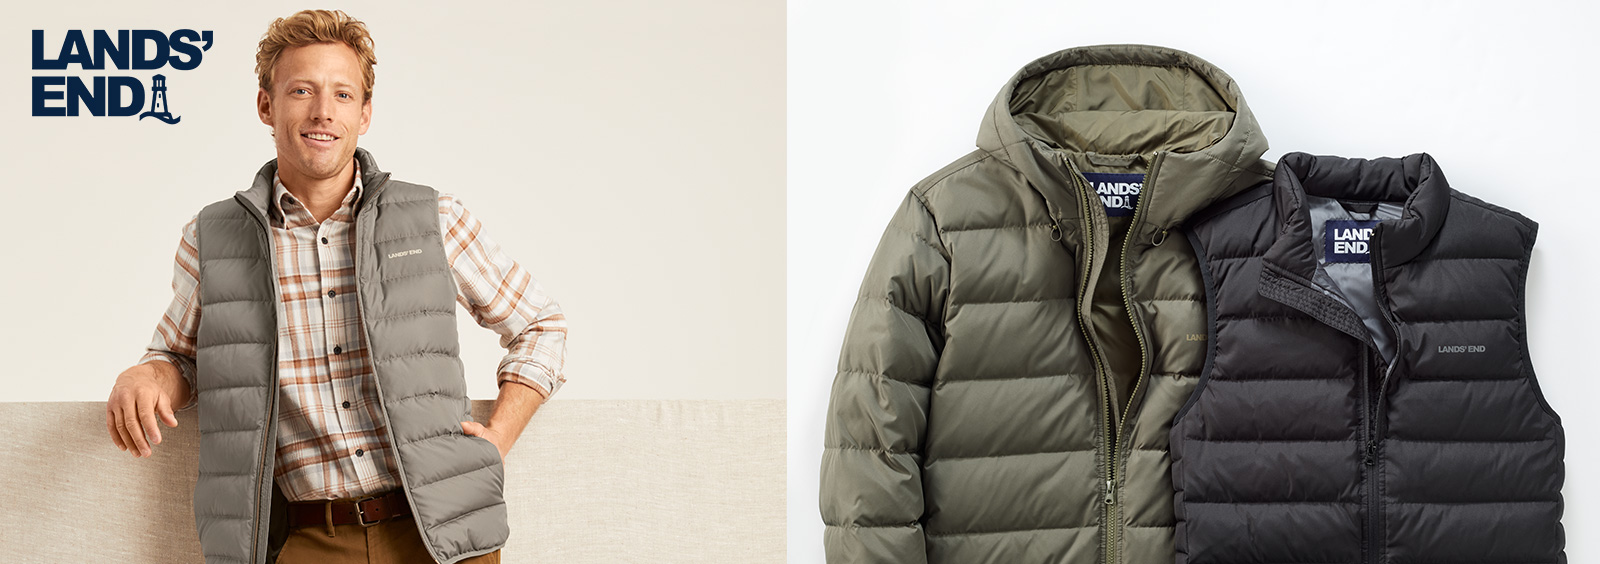 How To Wear a Puffer Vest for Men?